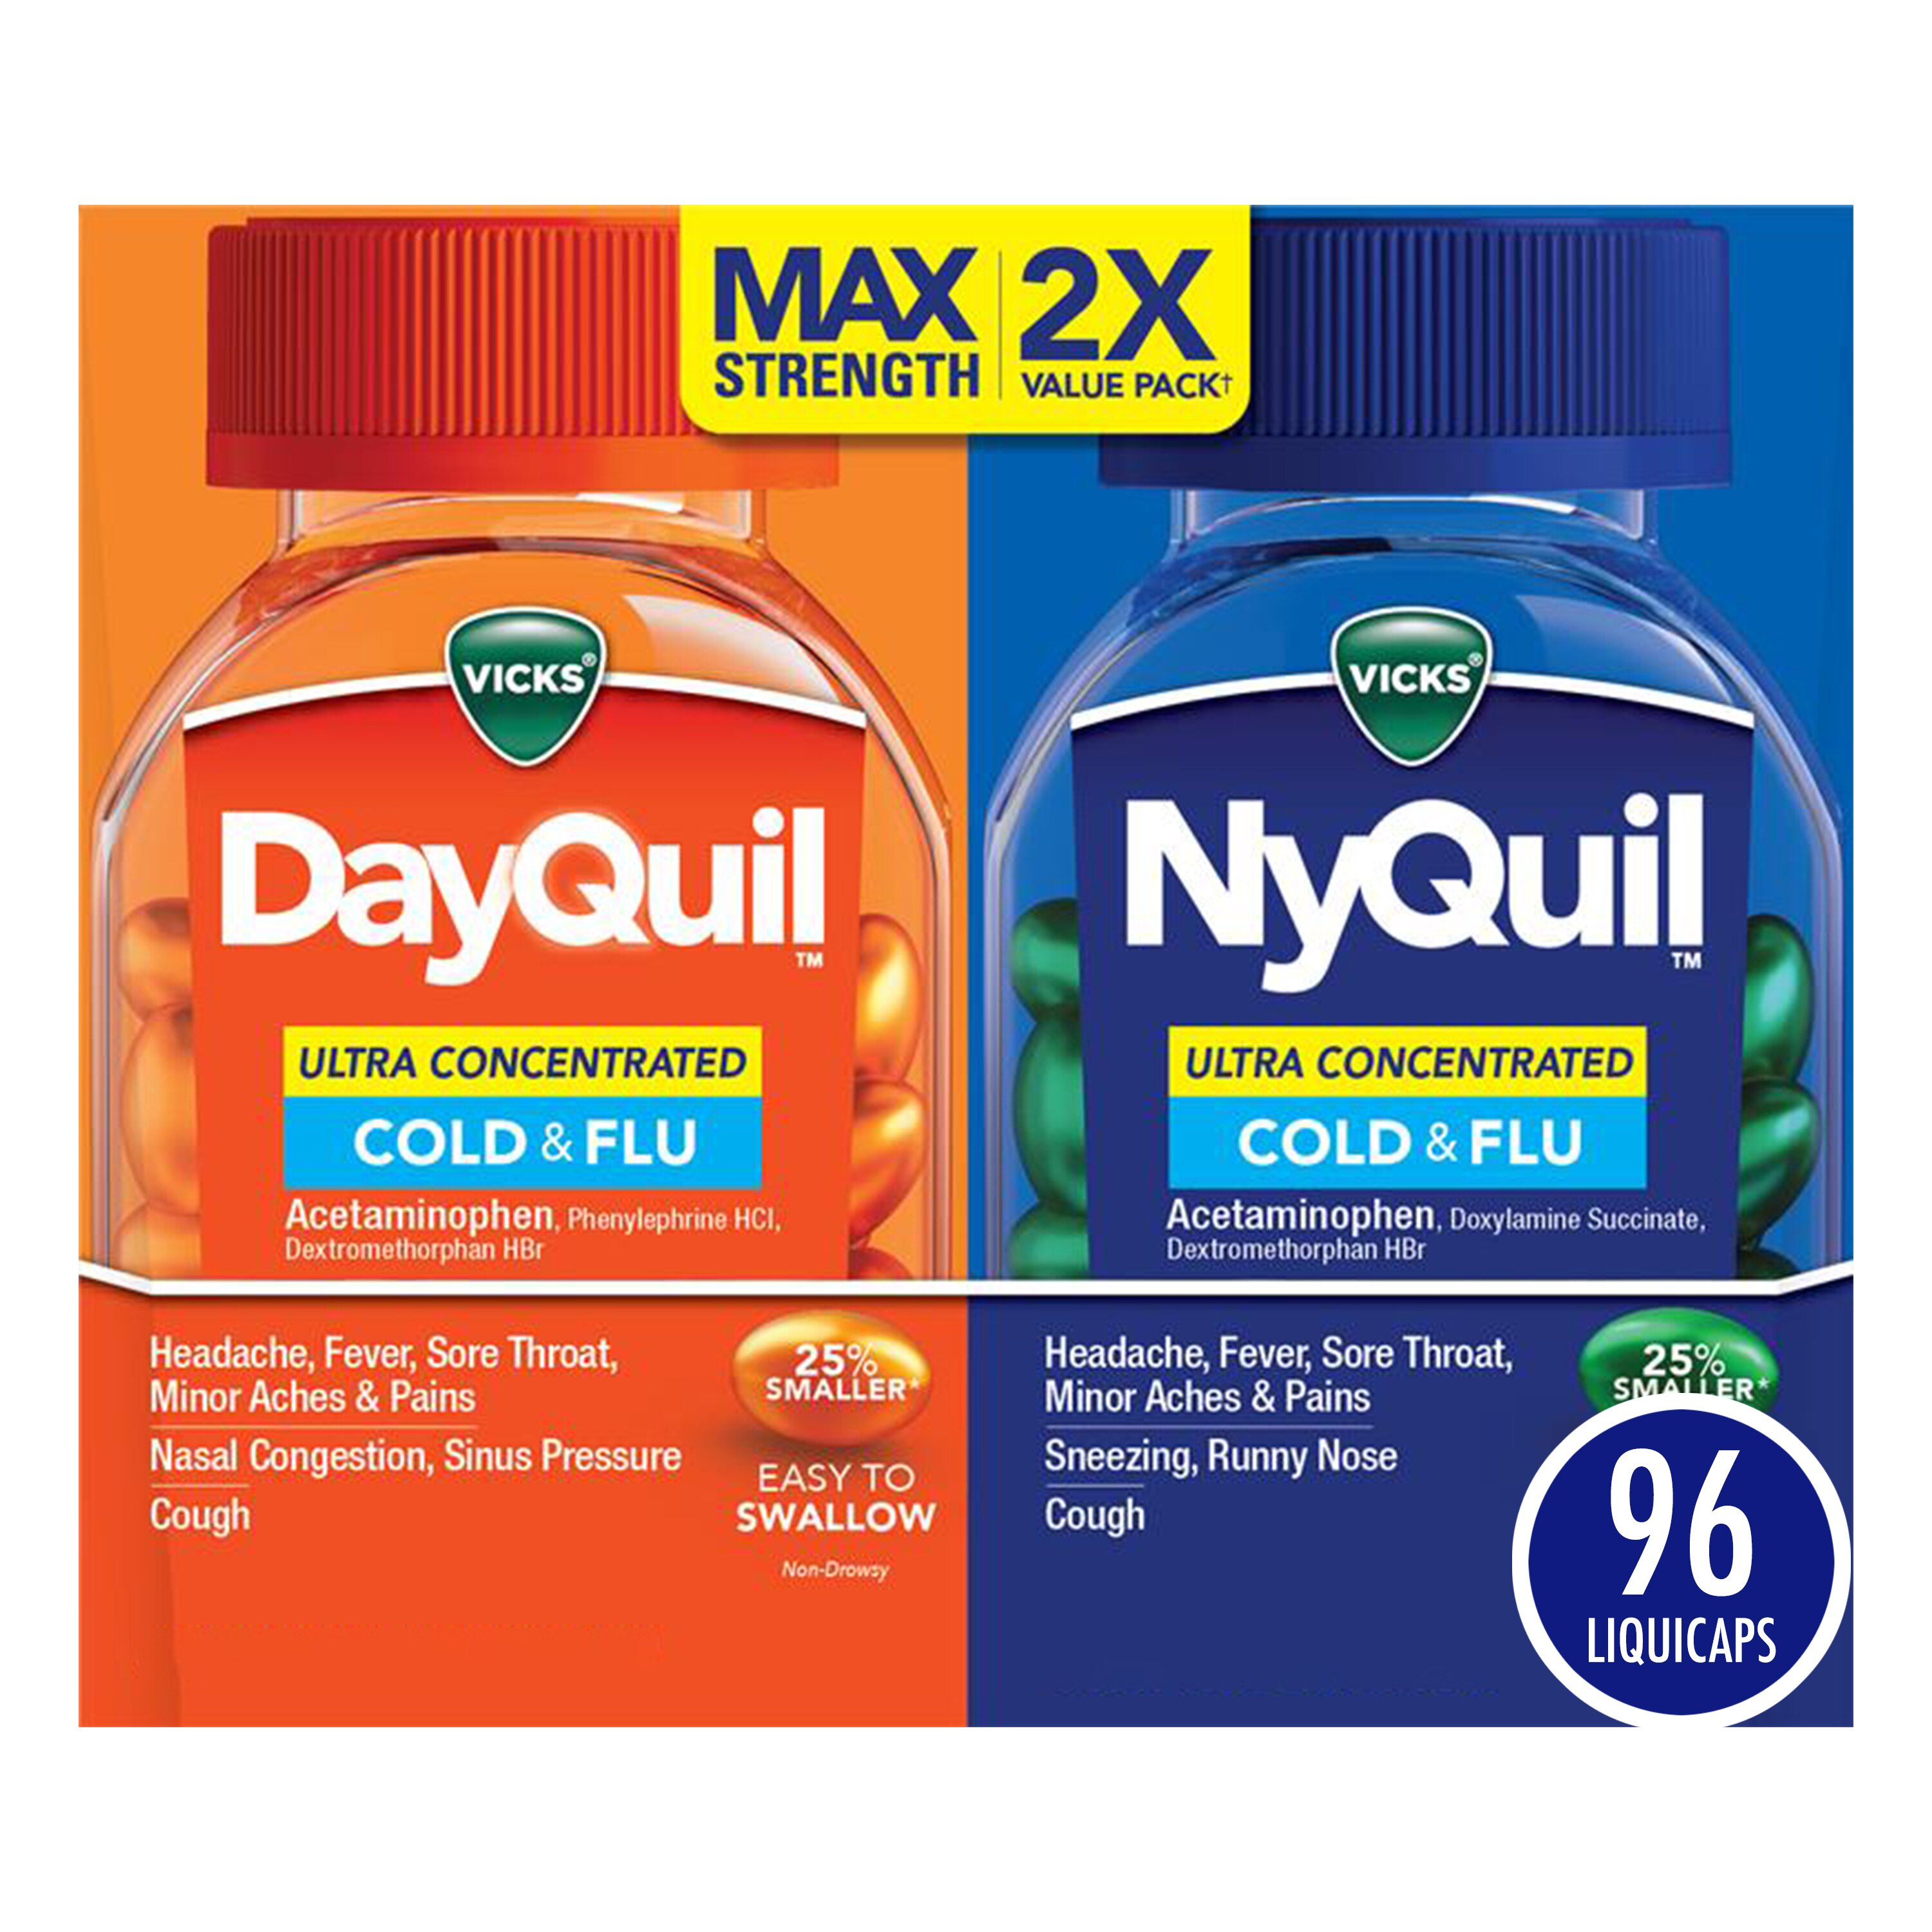 Vicks DayQuil & NyQuil Combo Pack, Ultra Concentrated Cold and Flu Medicine, Daytime & Nighttime LiquiCaps, 96 CT